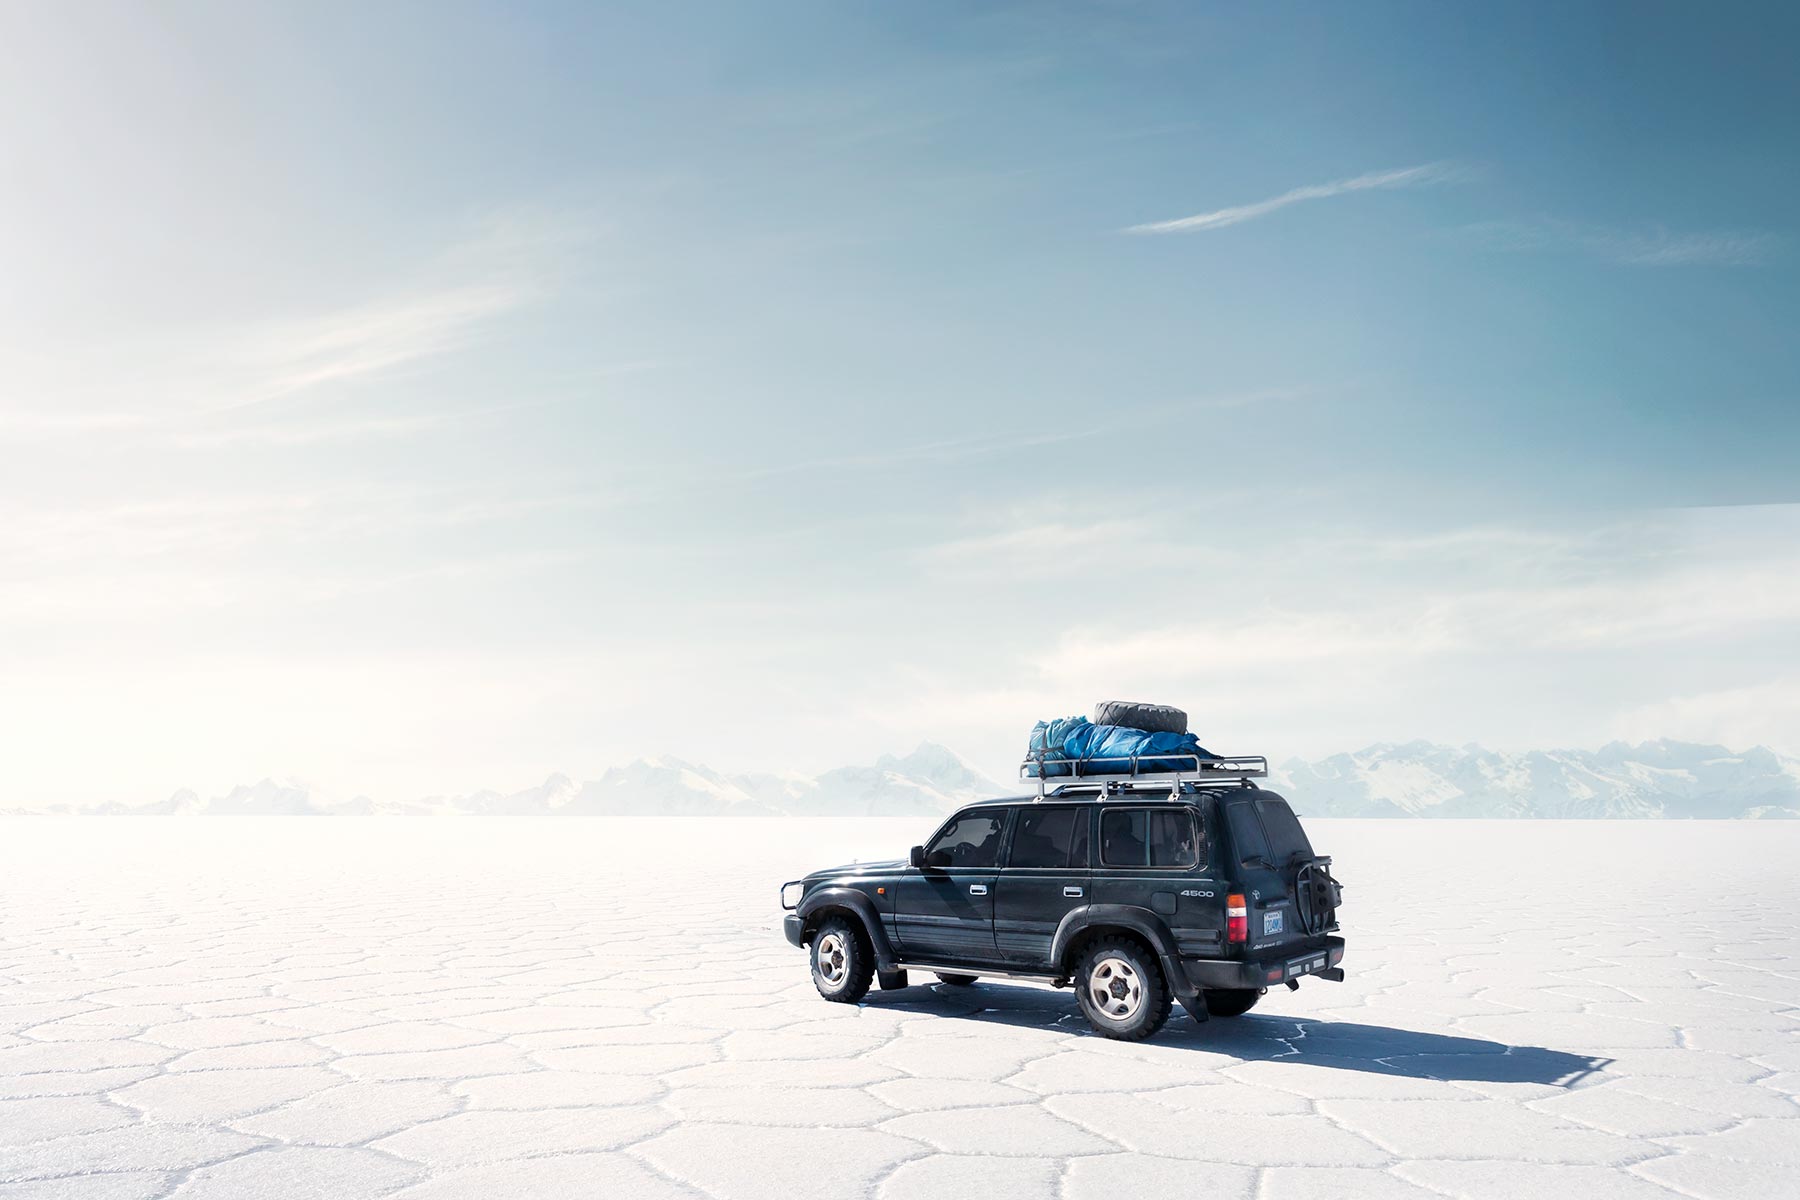 A car in the desert. Sony commercial photography project by Richard Boll of London